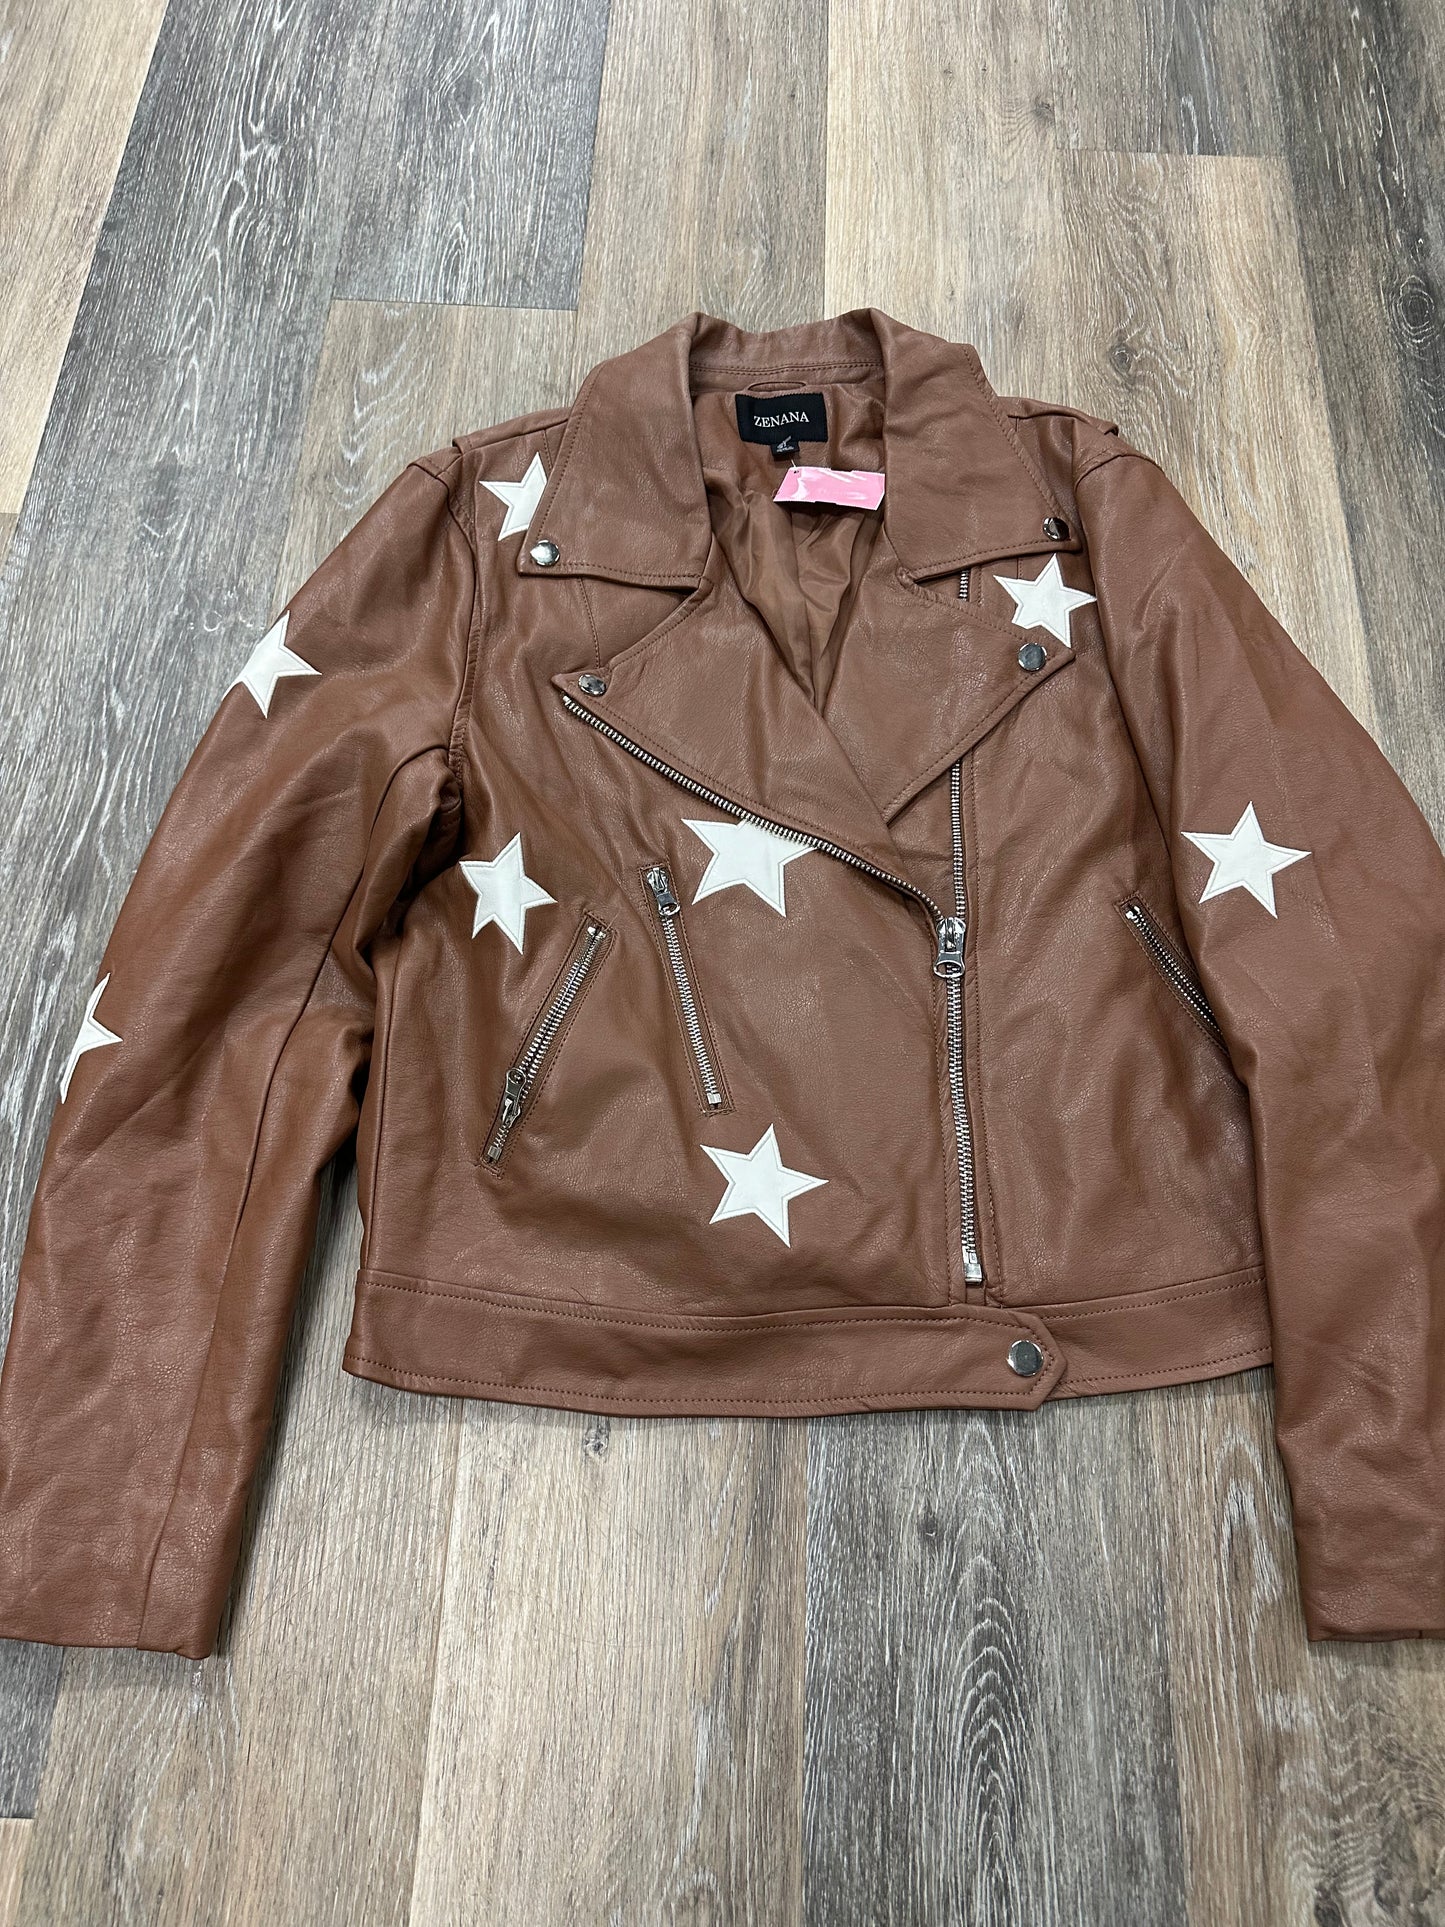 Jacket Leather By Zenana Outfitters  Size: Xl